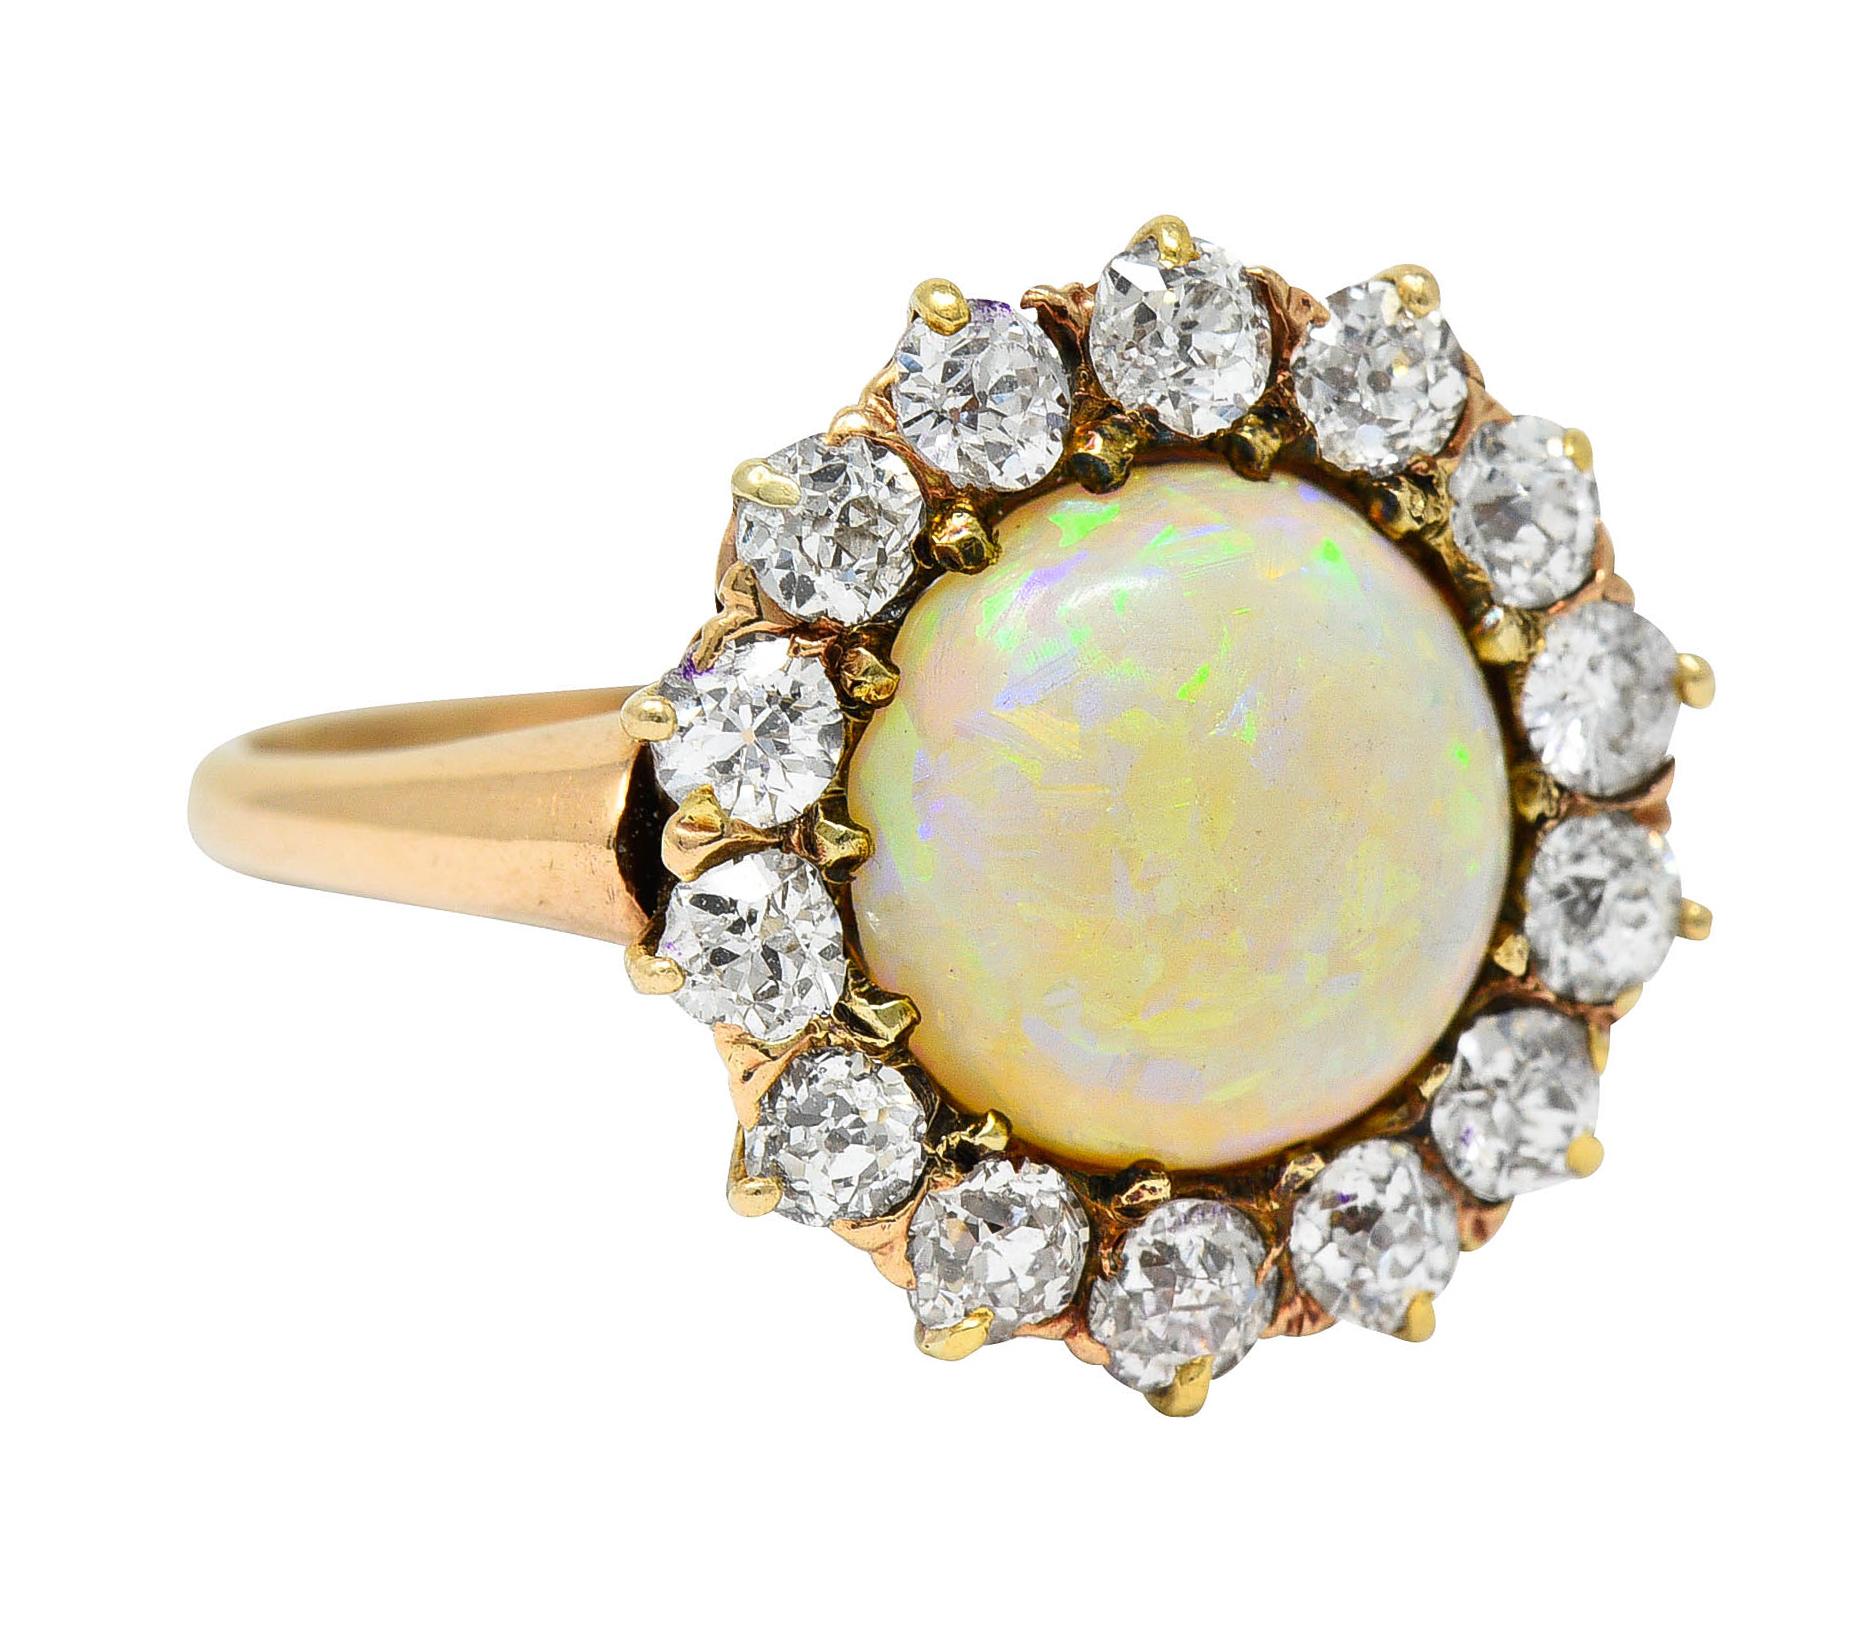 Cluster ring centers a round cabochon of opal measuring approximately 7.5 mm

Translucent and white in body color with very strong spectral play-of-color

Surrounded by a halo of old European and mine cut diamonds

Weighing in total approximately